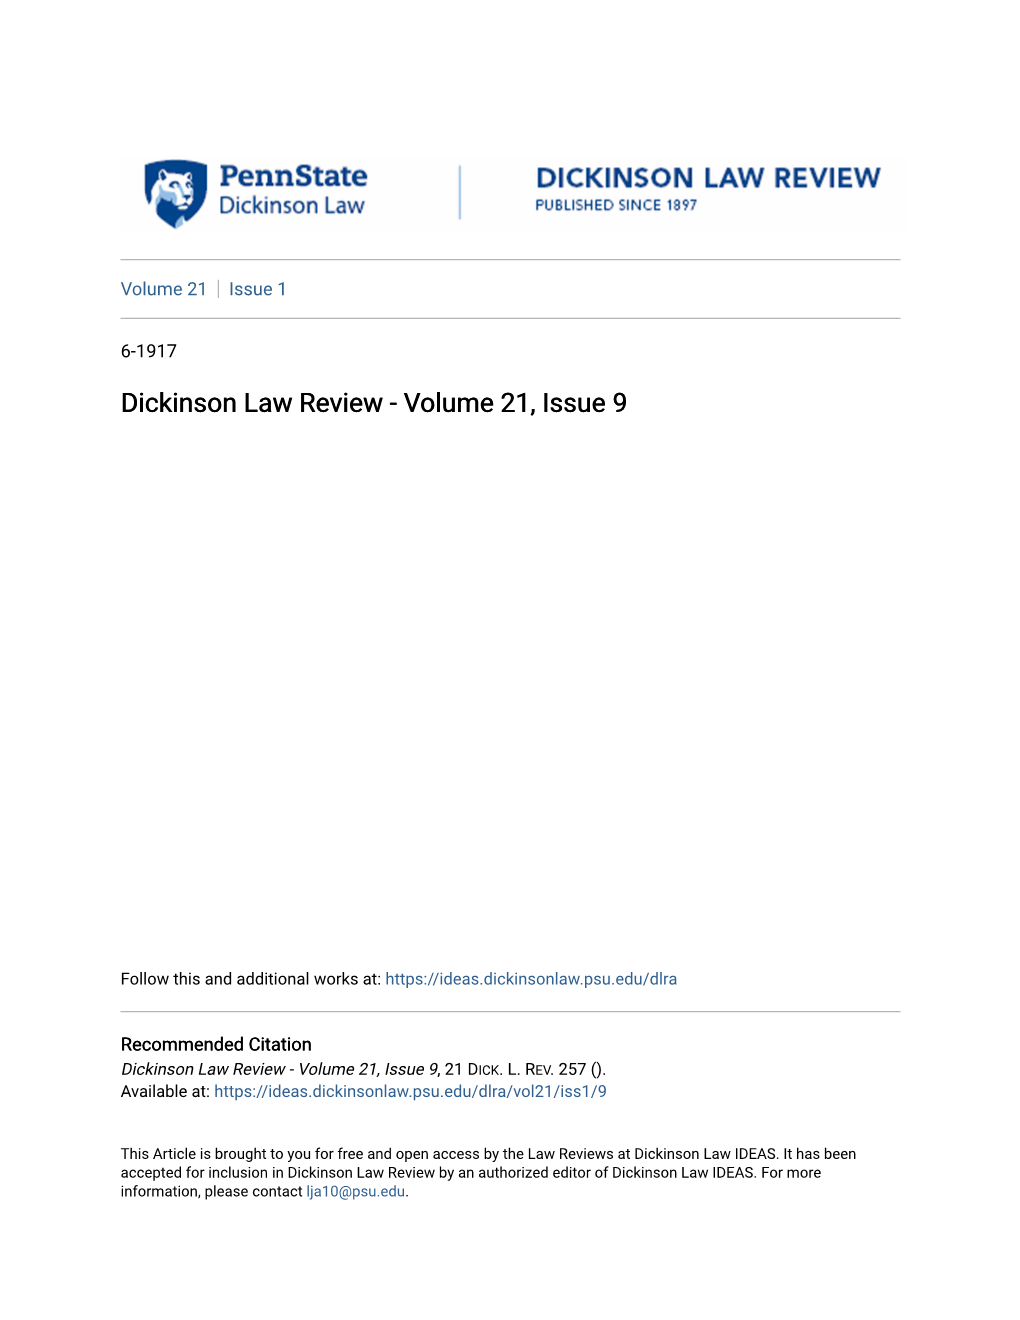 Dickinson Law Review - Volume 21, Issue 9